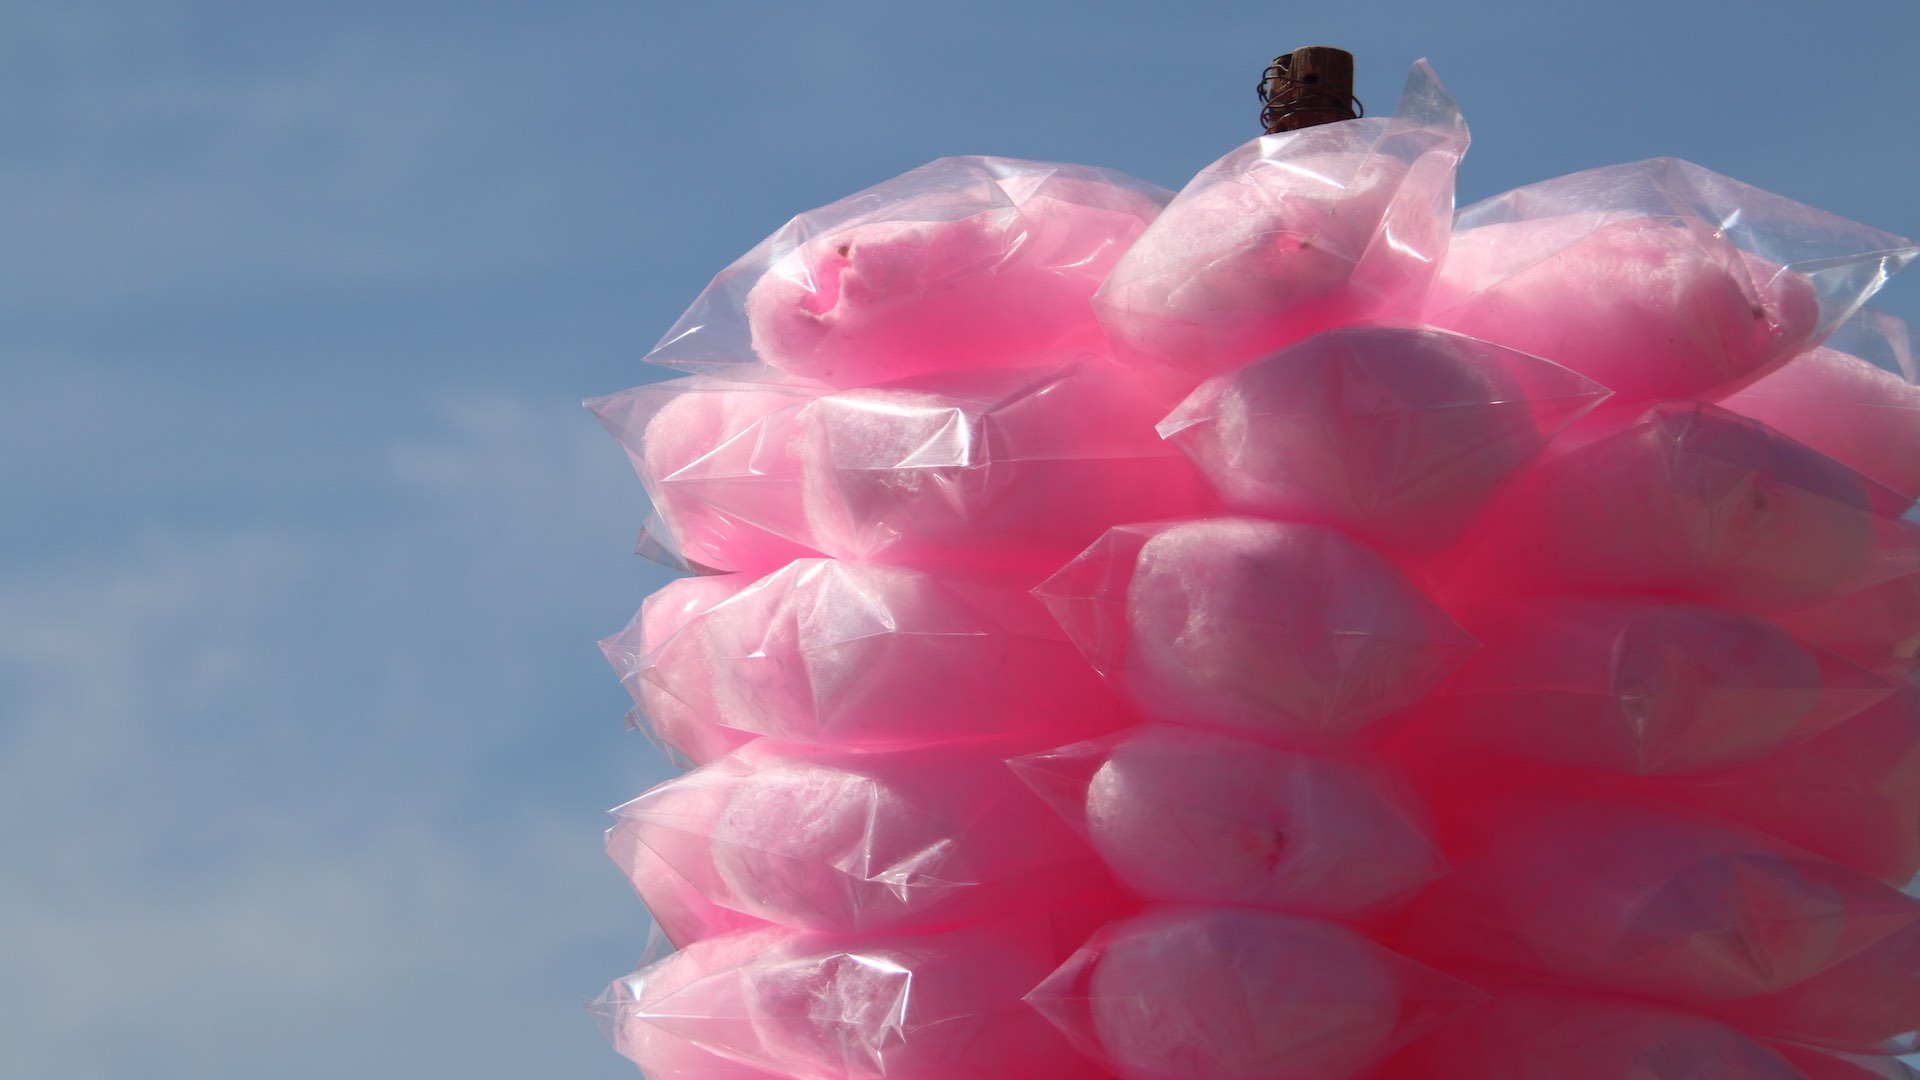 Cotton candy cancer concerns sweep India